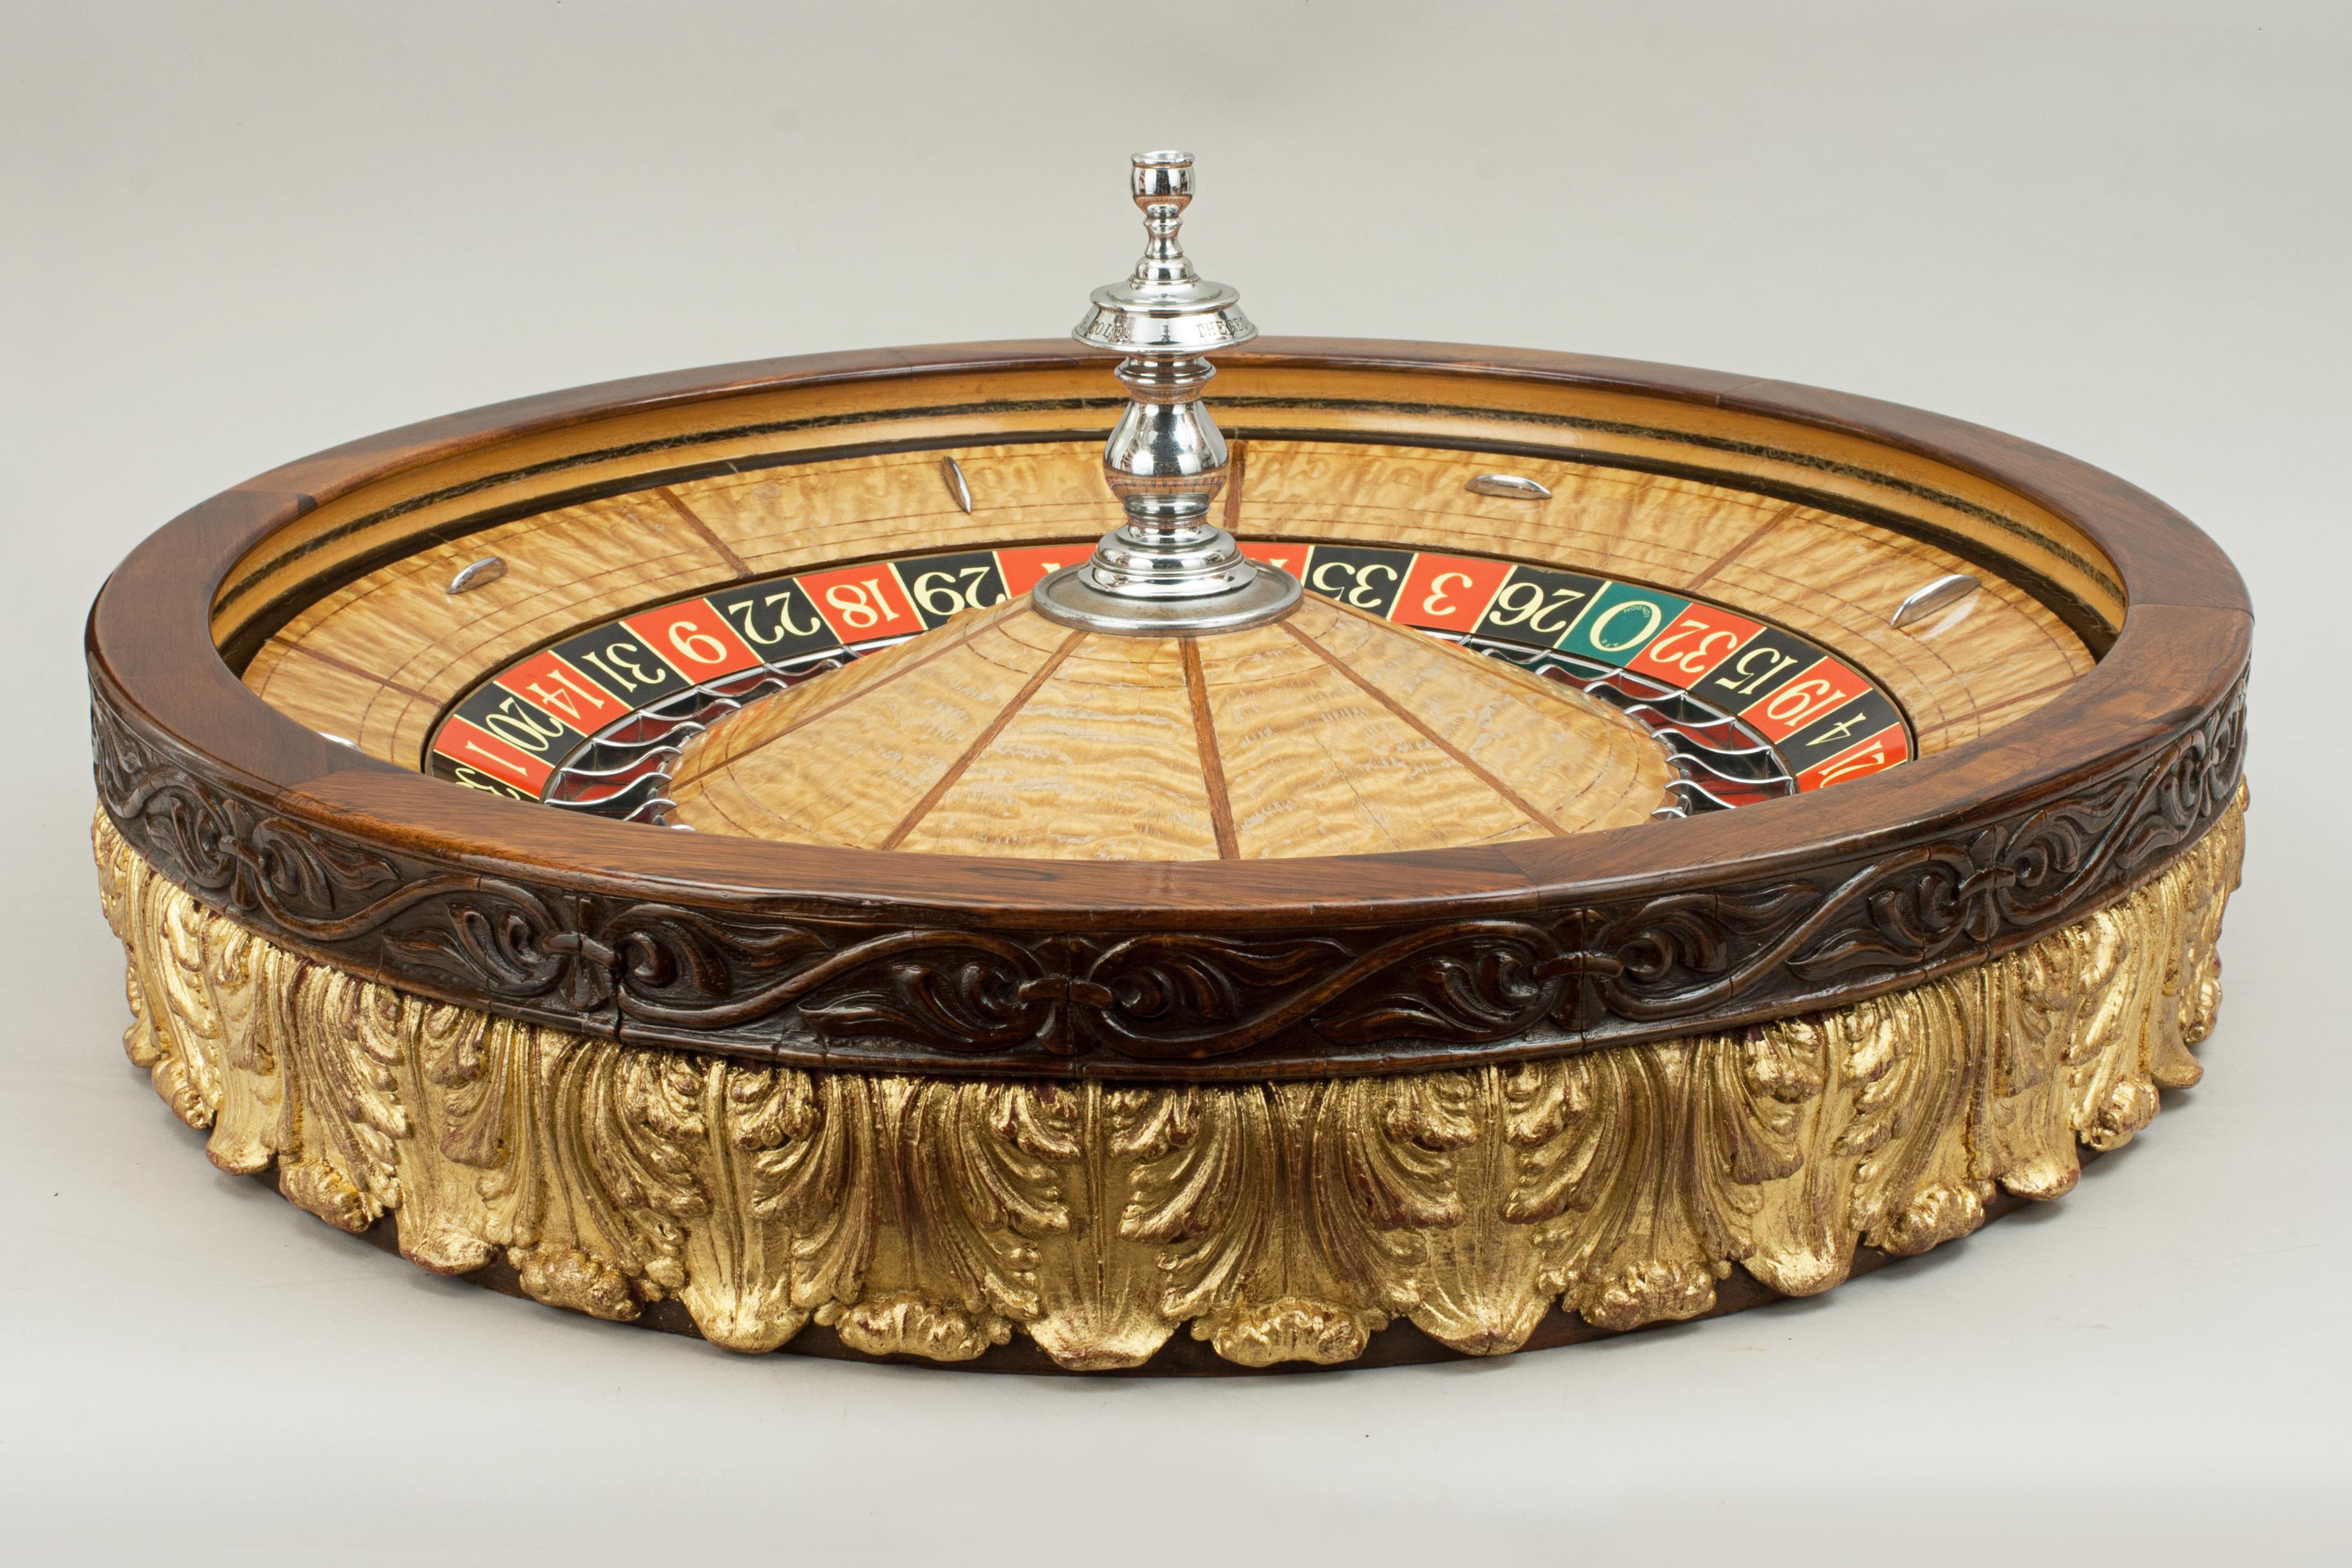 Large George Mason Co. Casino roulette wheel
A rare and large late 19th, early 20th century American professional saloon roulette wheel, the turret marked 'THE GEO. MASON CO. MAKERS. DENVER. COLO.' with exotic woods and the circular hardwood outer